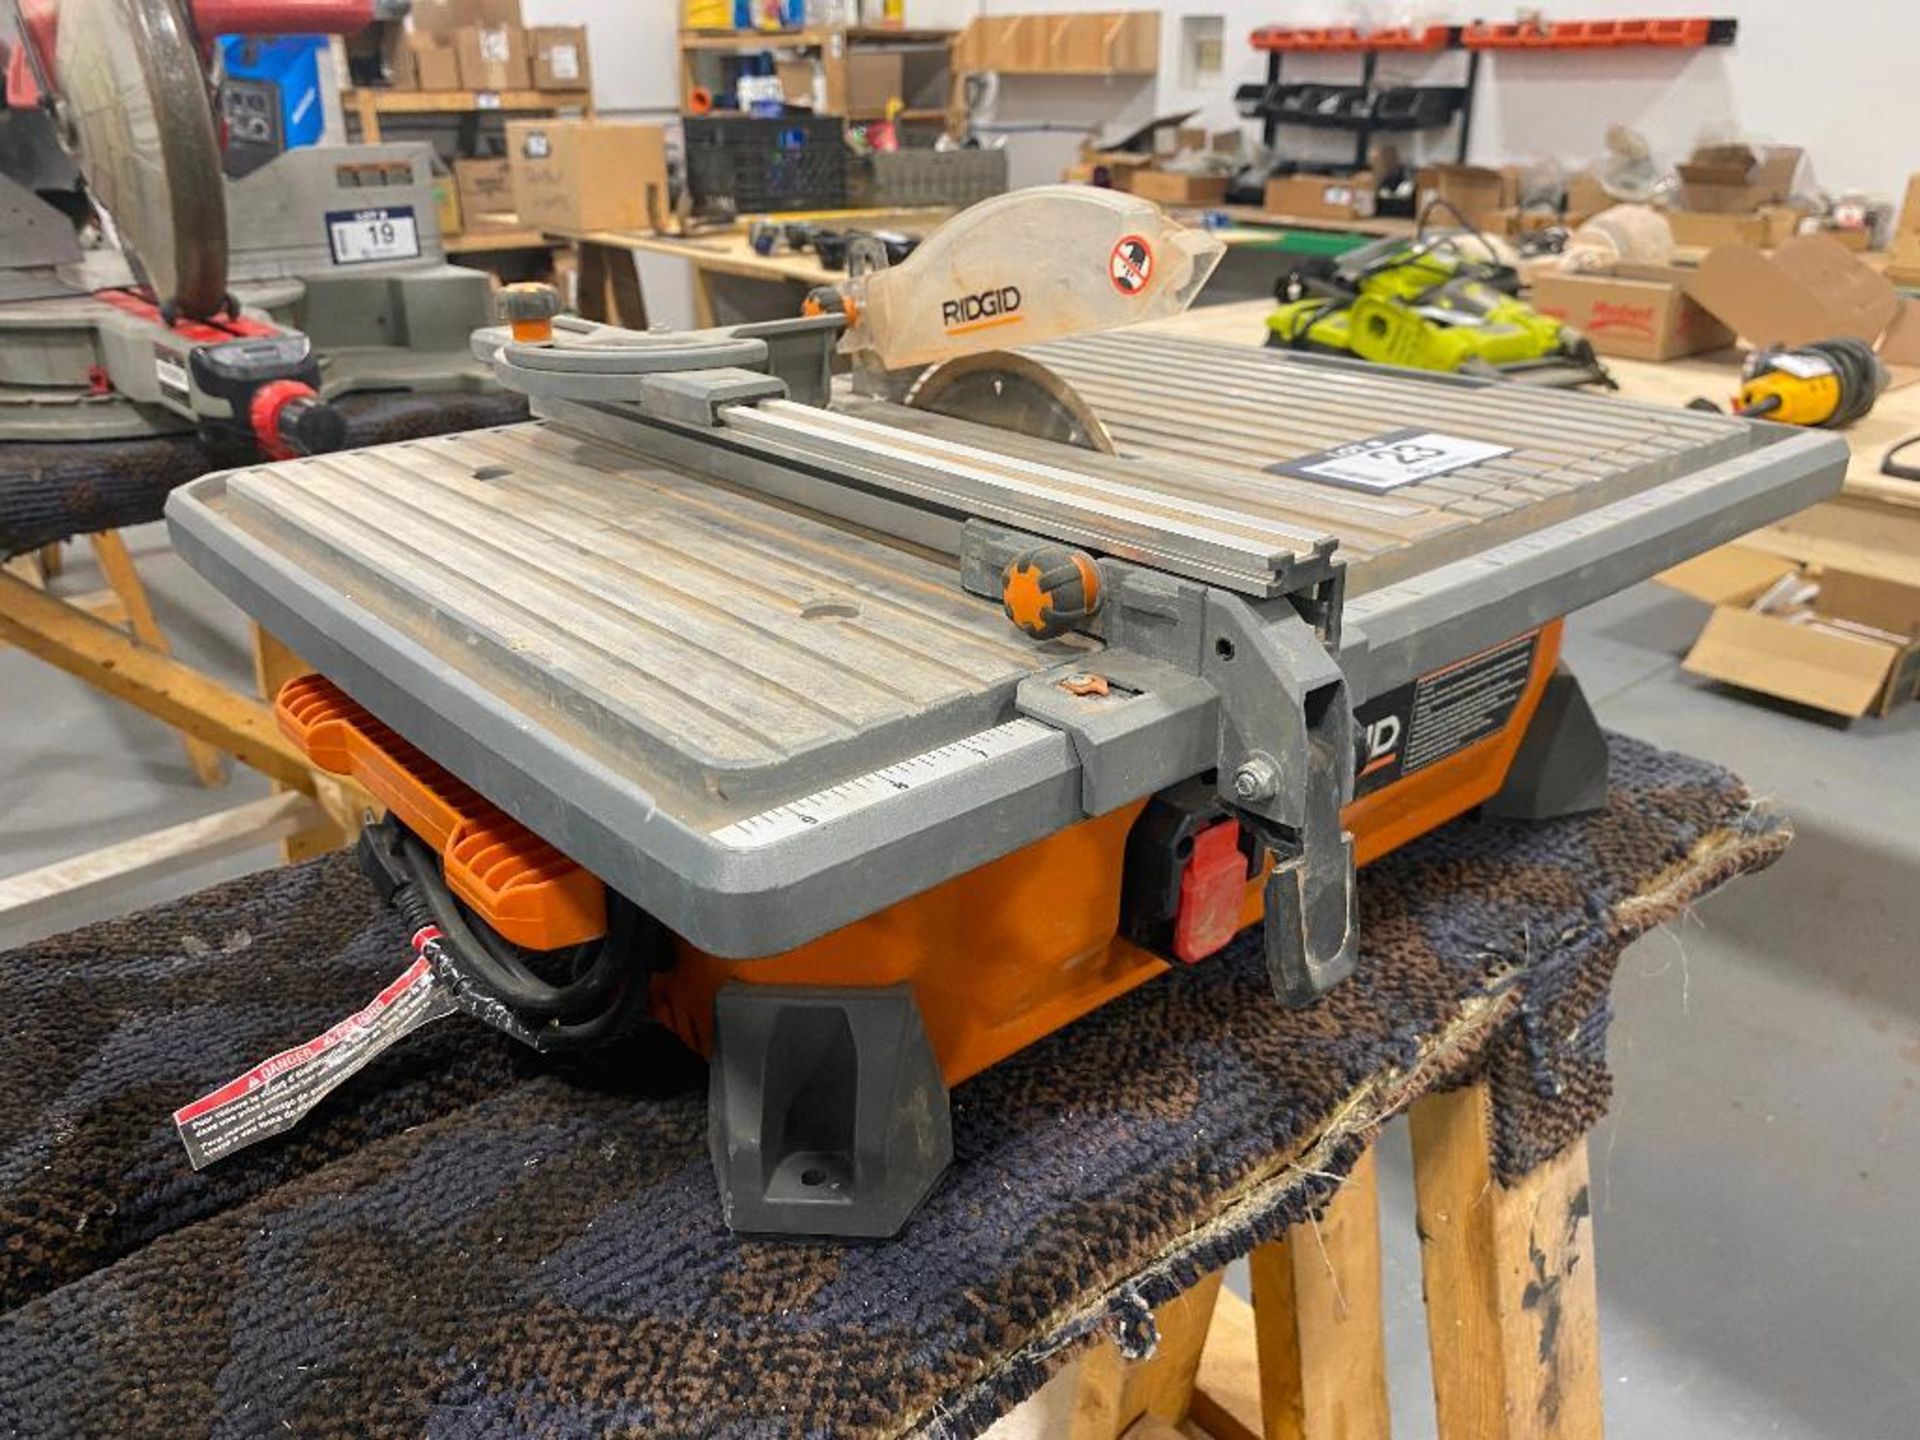 Ridgid R4020 7-Inch Table Top Wet Tile Saw - Image 2 of 3